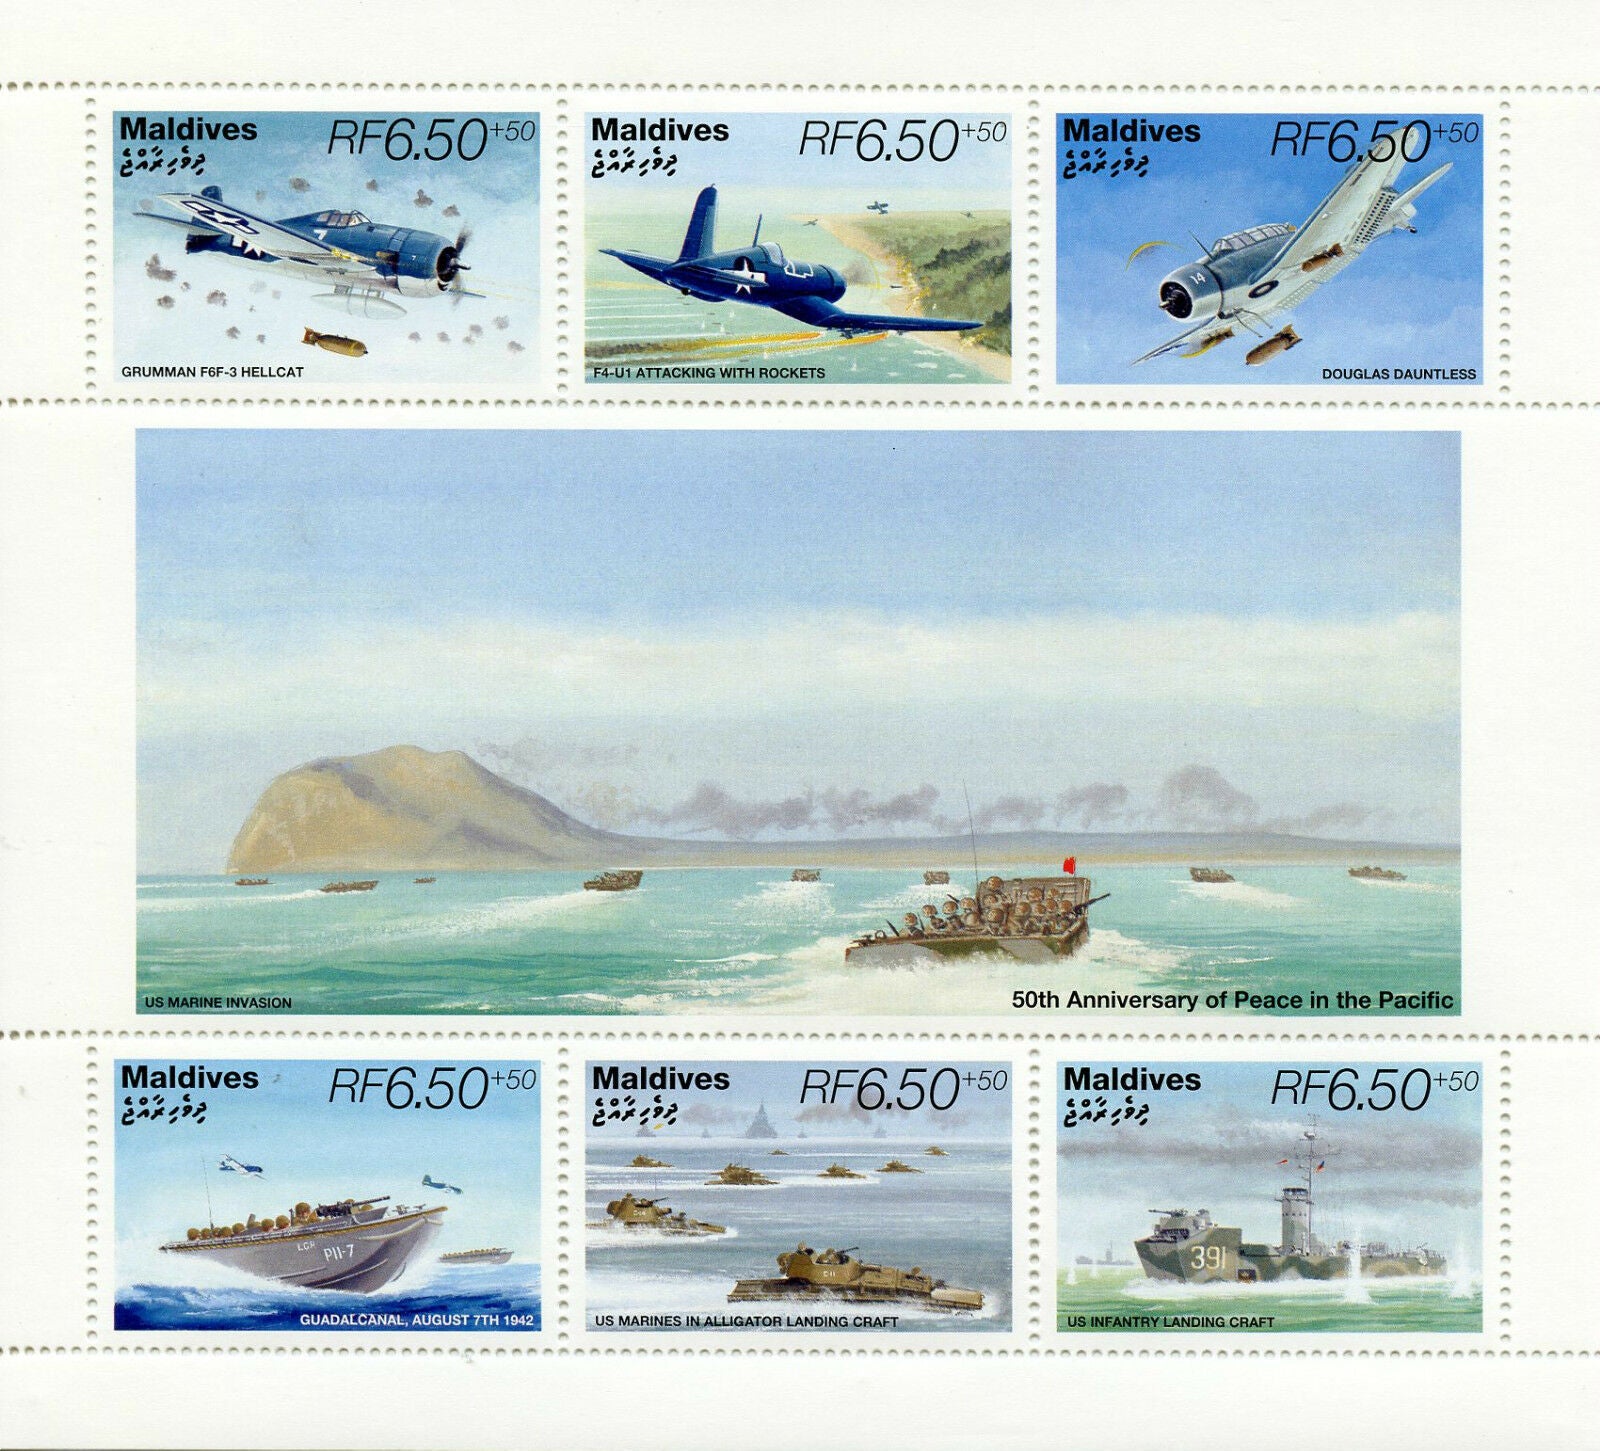 Maldives 1995 MNH Military Stamps WWII WW2 VJ Day Peace Pacific Aviation 6v M/S